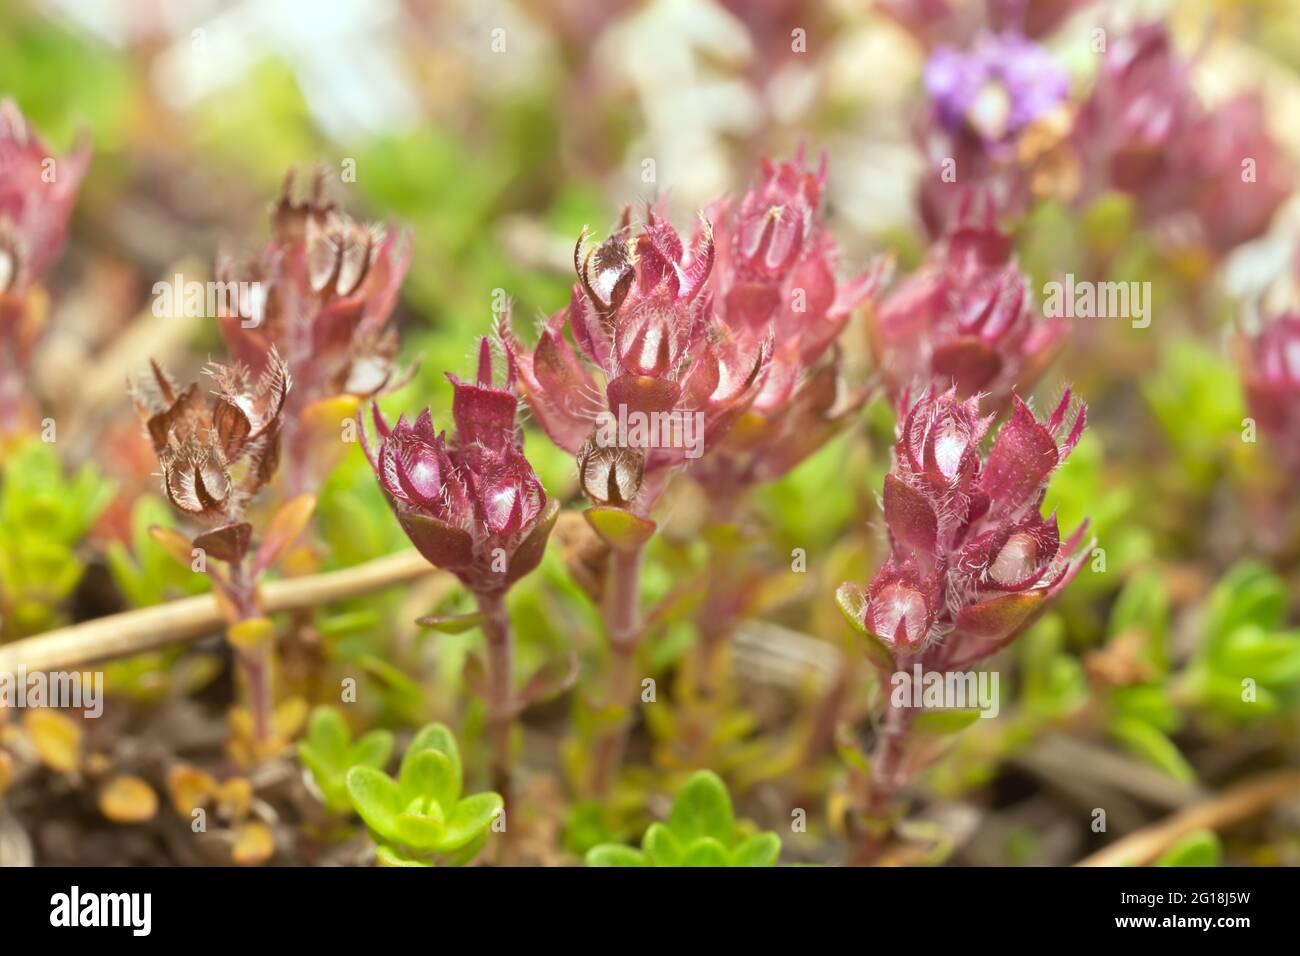 Breckland thyme, Thymus serpyllum plants with buds Stock Photo